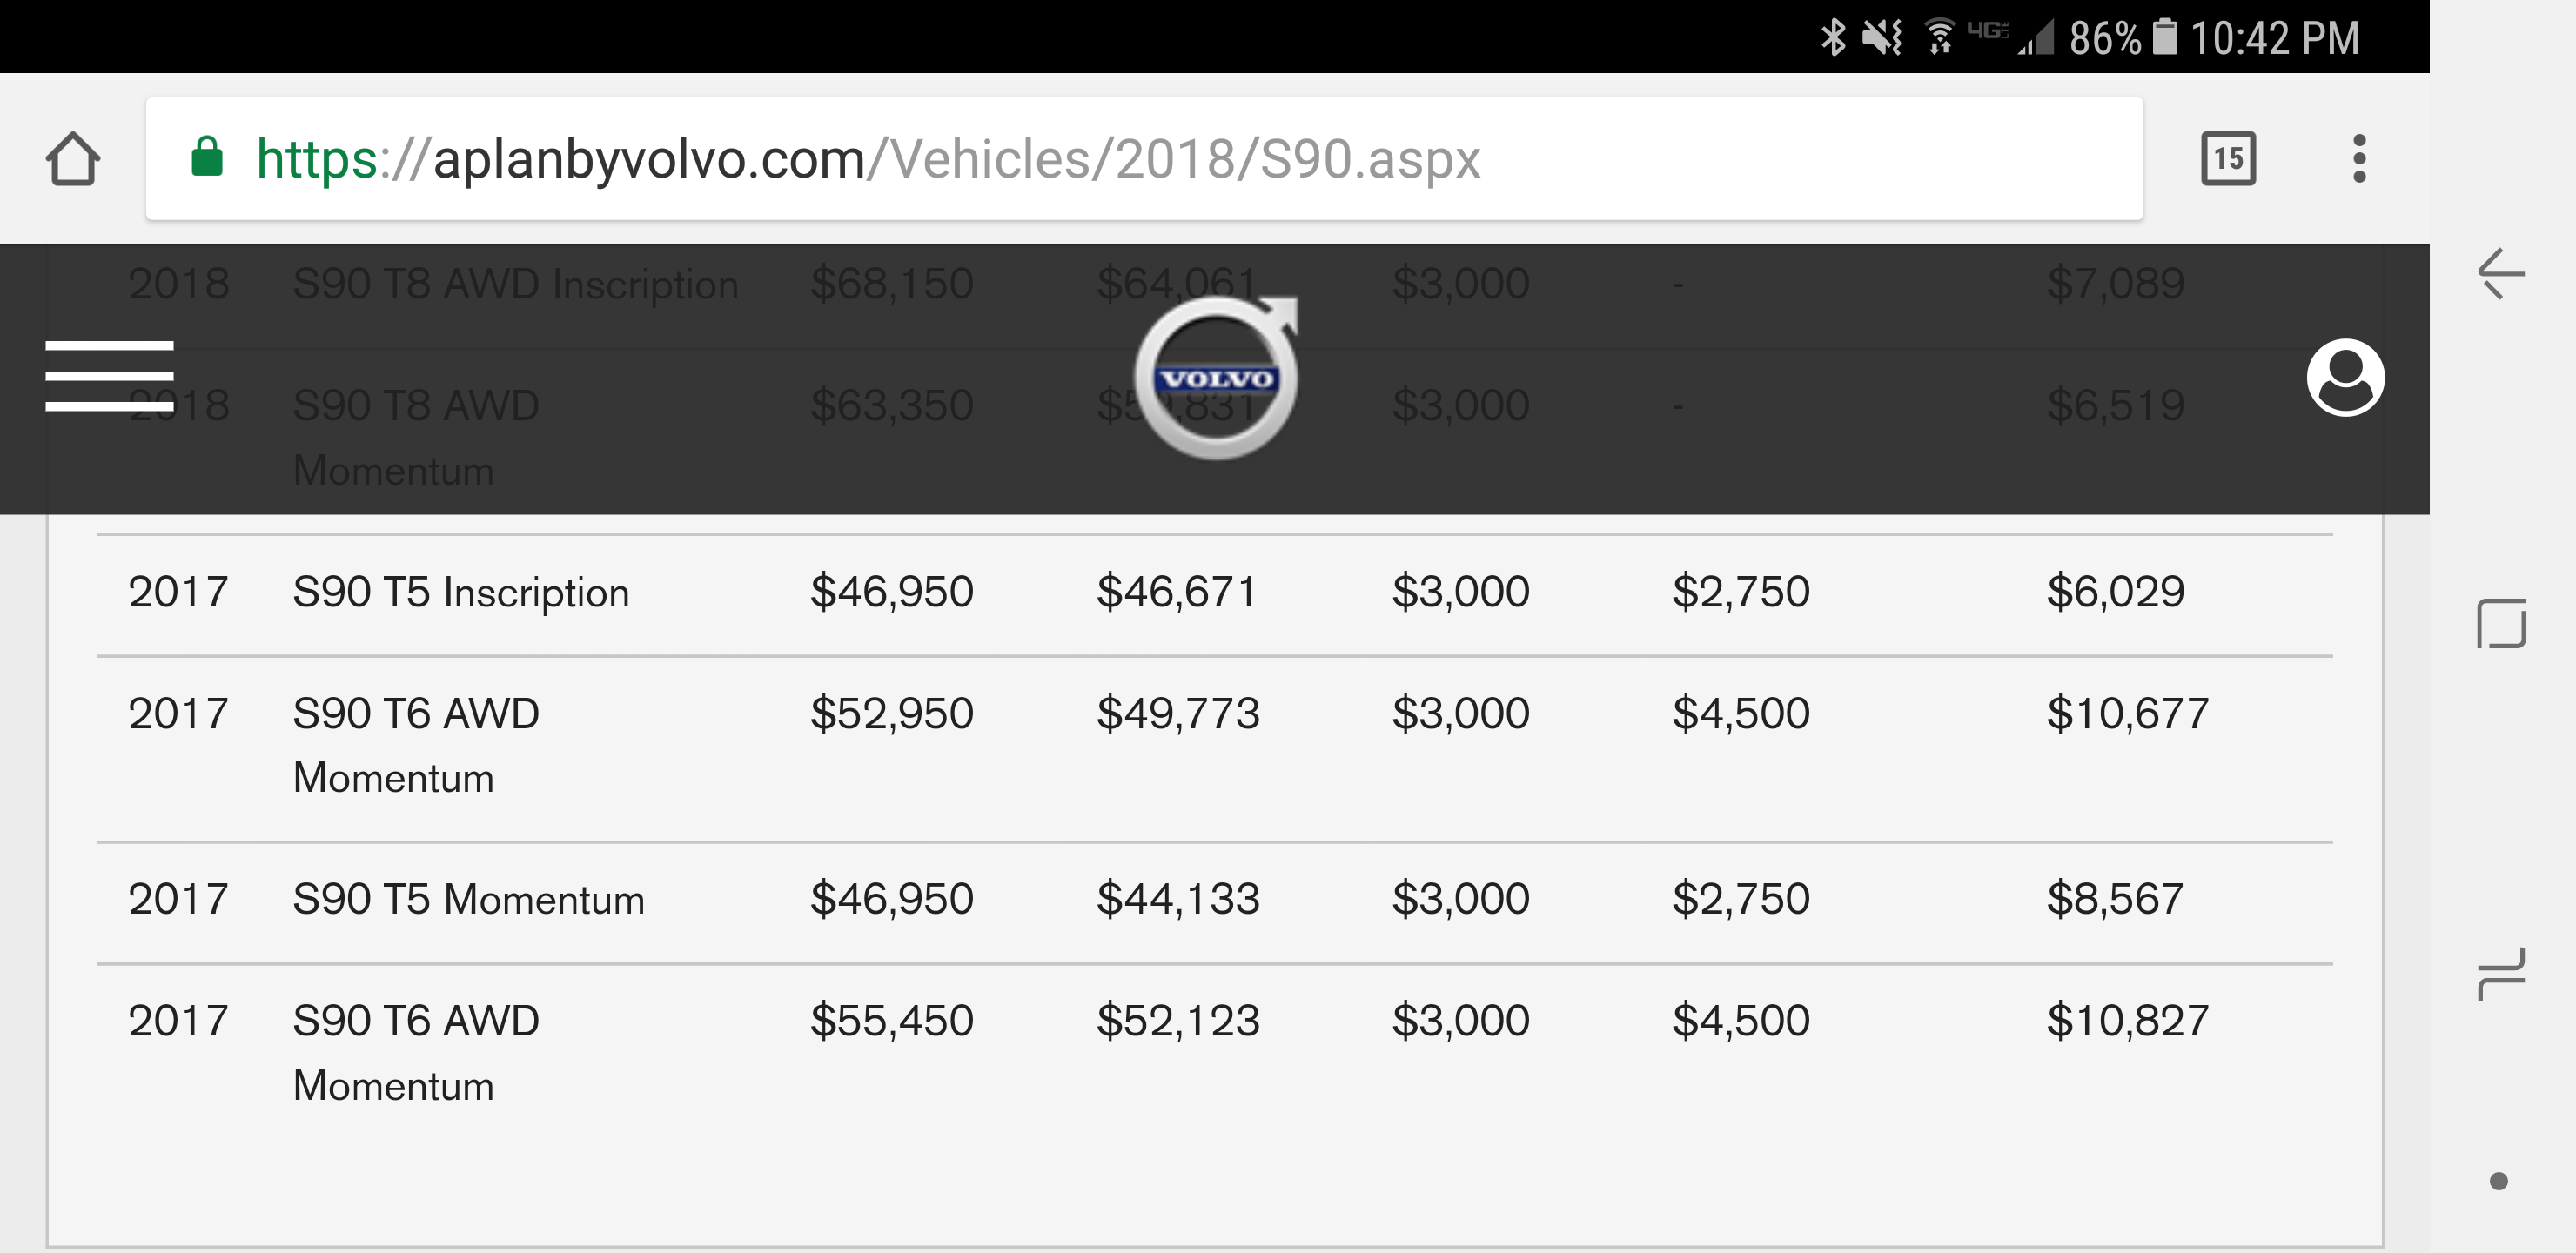 costco-pricing-for-volvo-ask-the-hackrs-leasehackr-forum